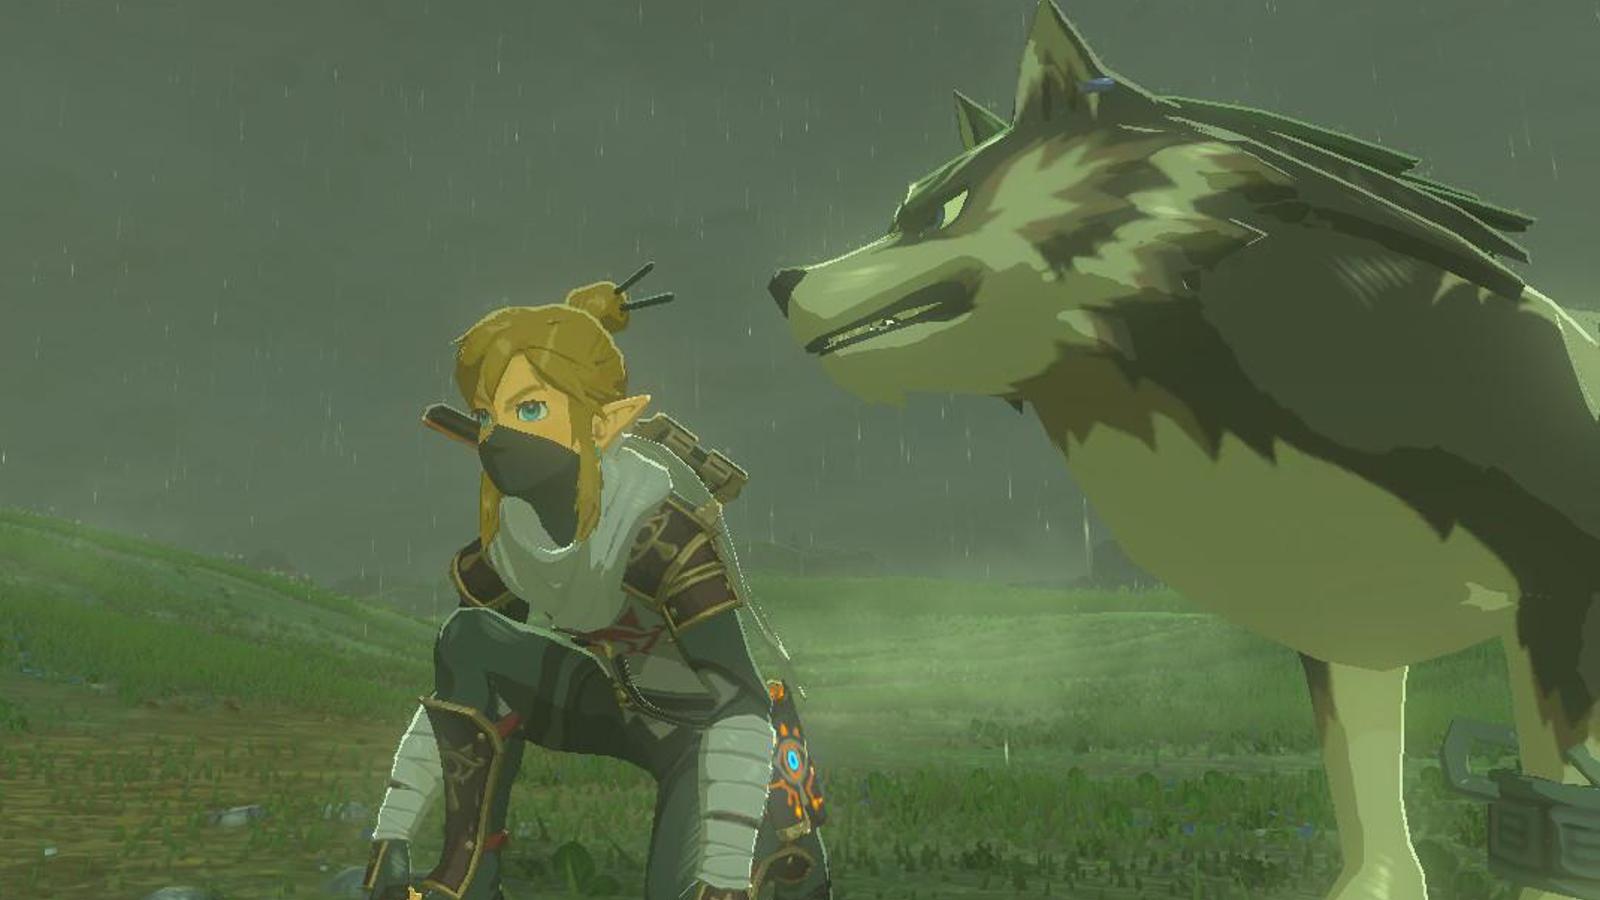 Wolf Link and Link plan an attack